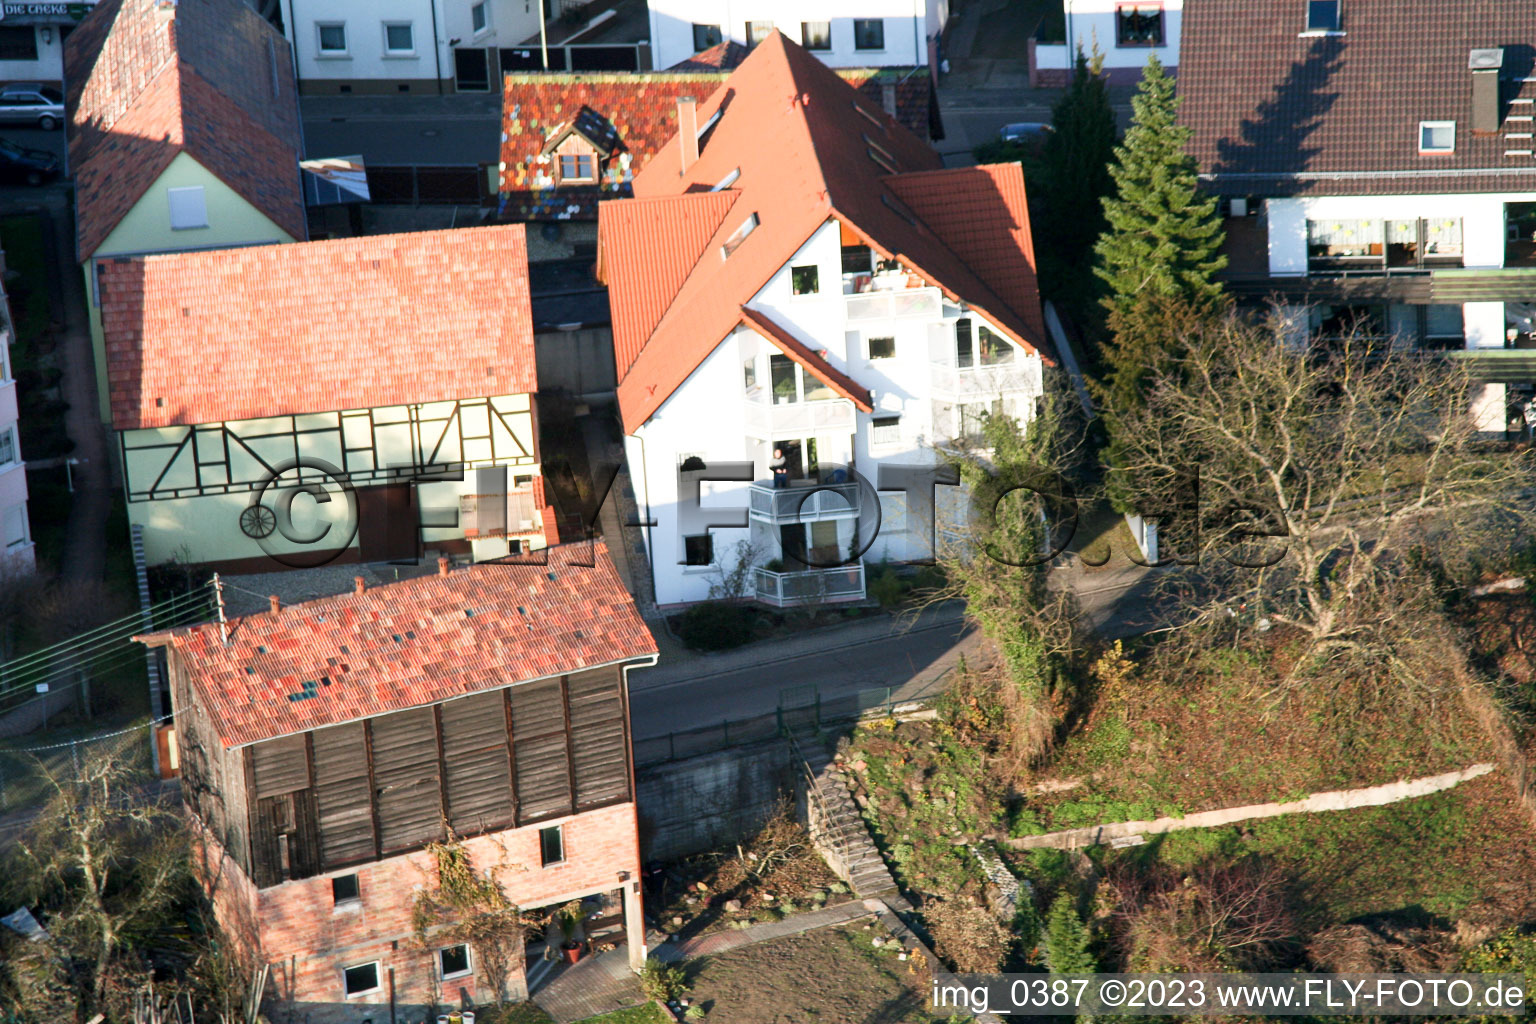 Aerial photograpy of Bahnhofstr in Jockgrim in the state Rhineland-Palatinate, Germany